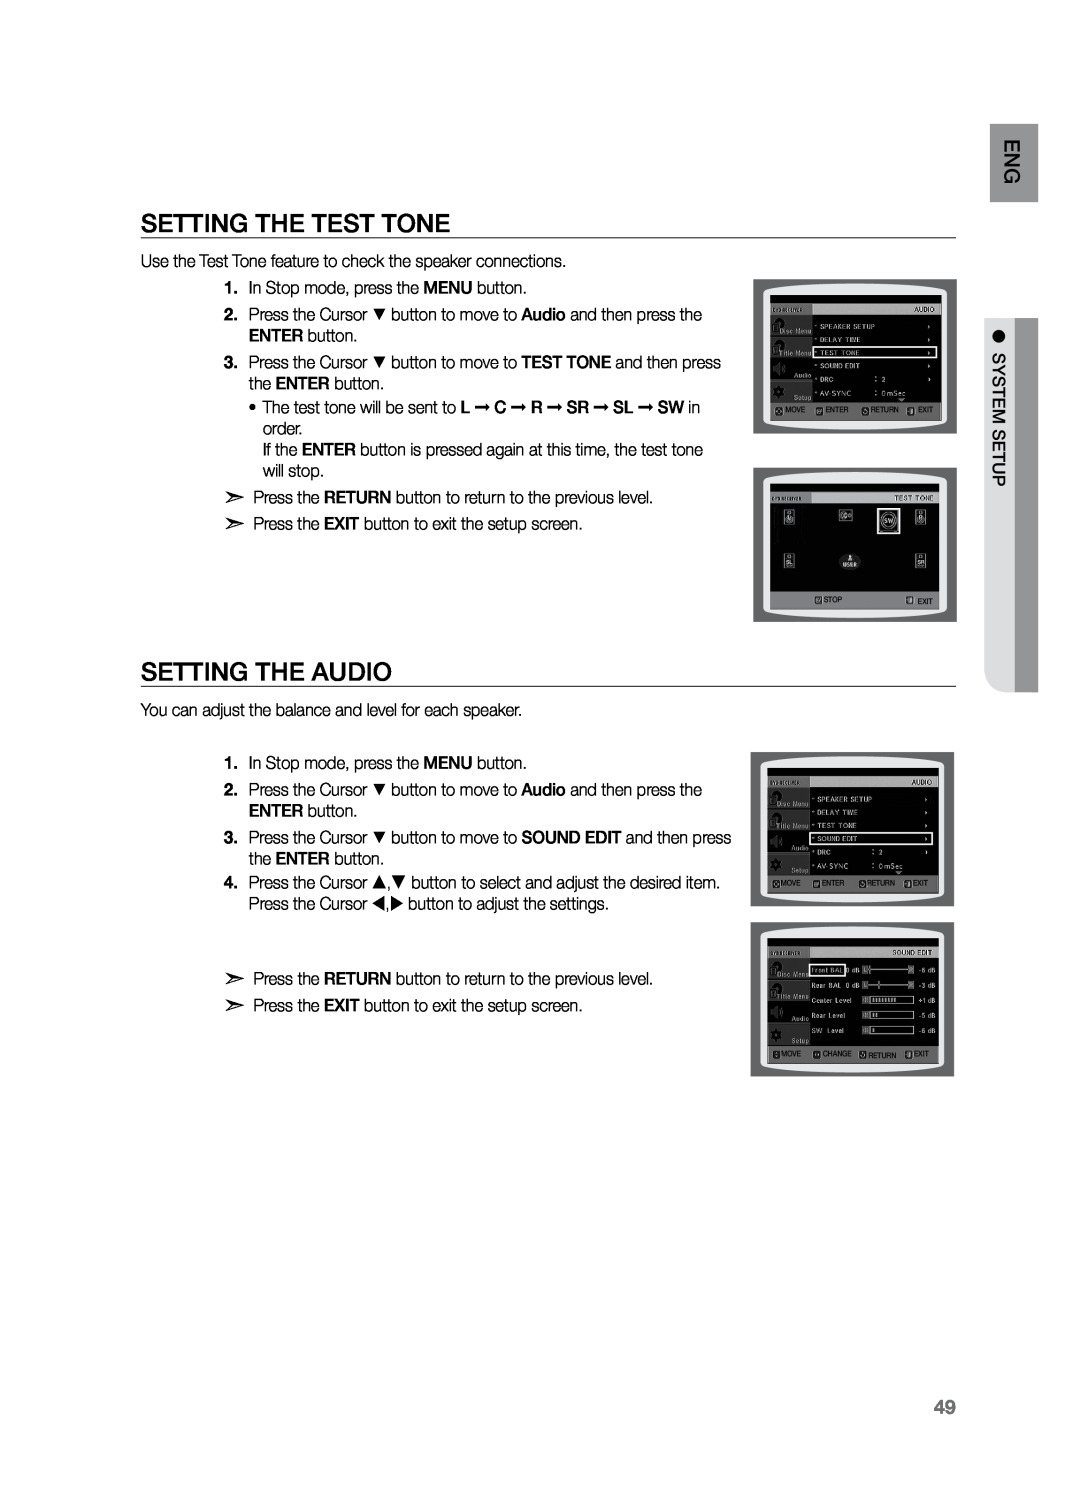 Samsung HT-Z221 user manual Setting the Test Tone, Setting the Audio 